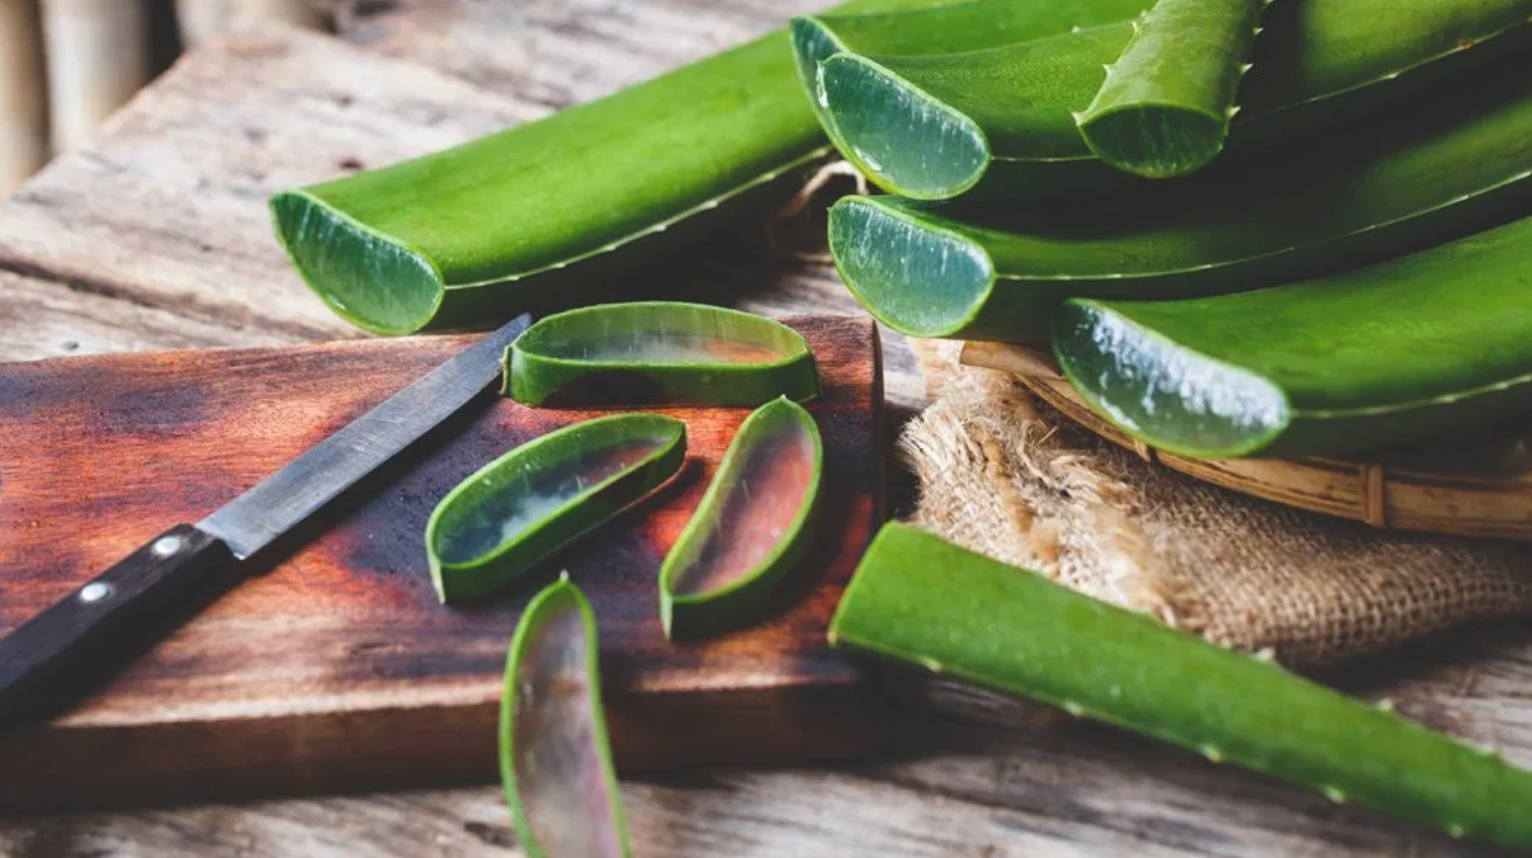 Slices of aloe vera on a wooden cutting board on a wooden table top.